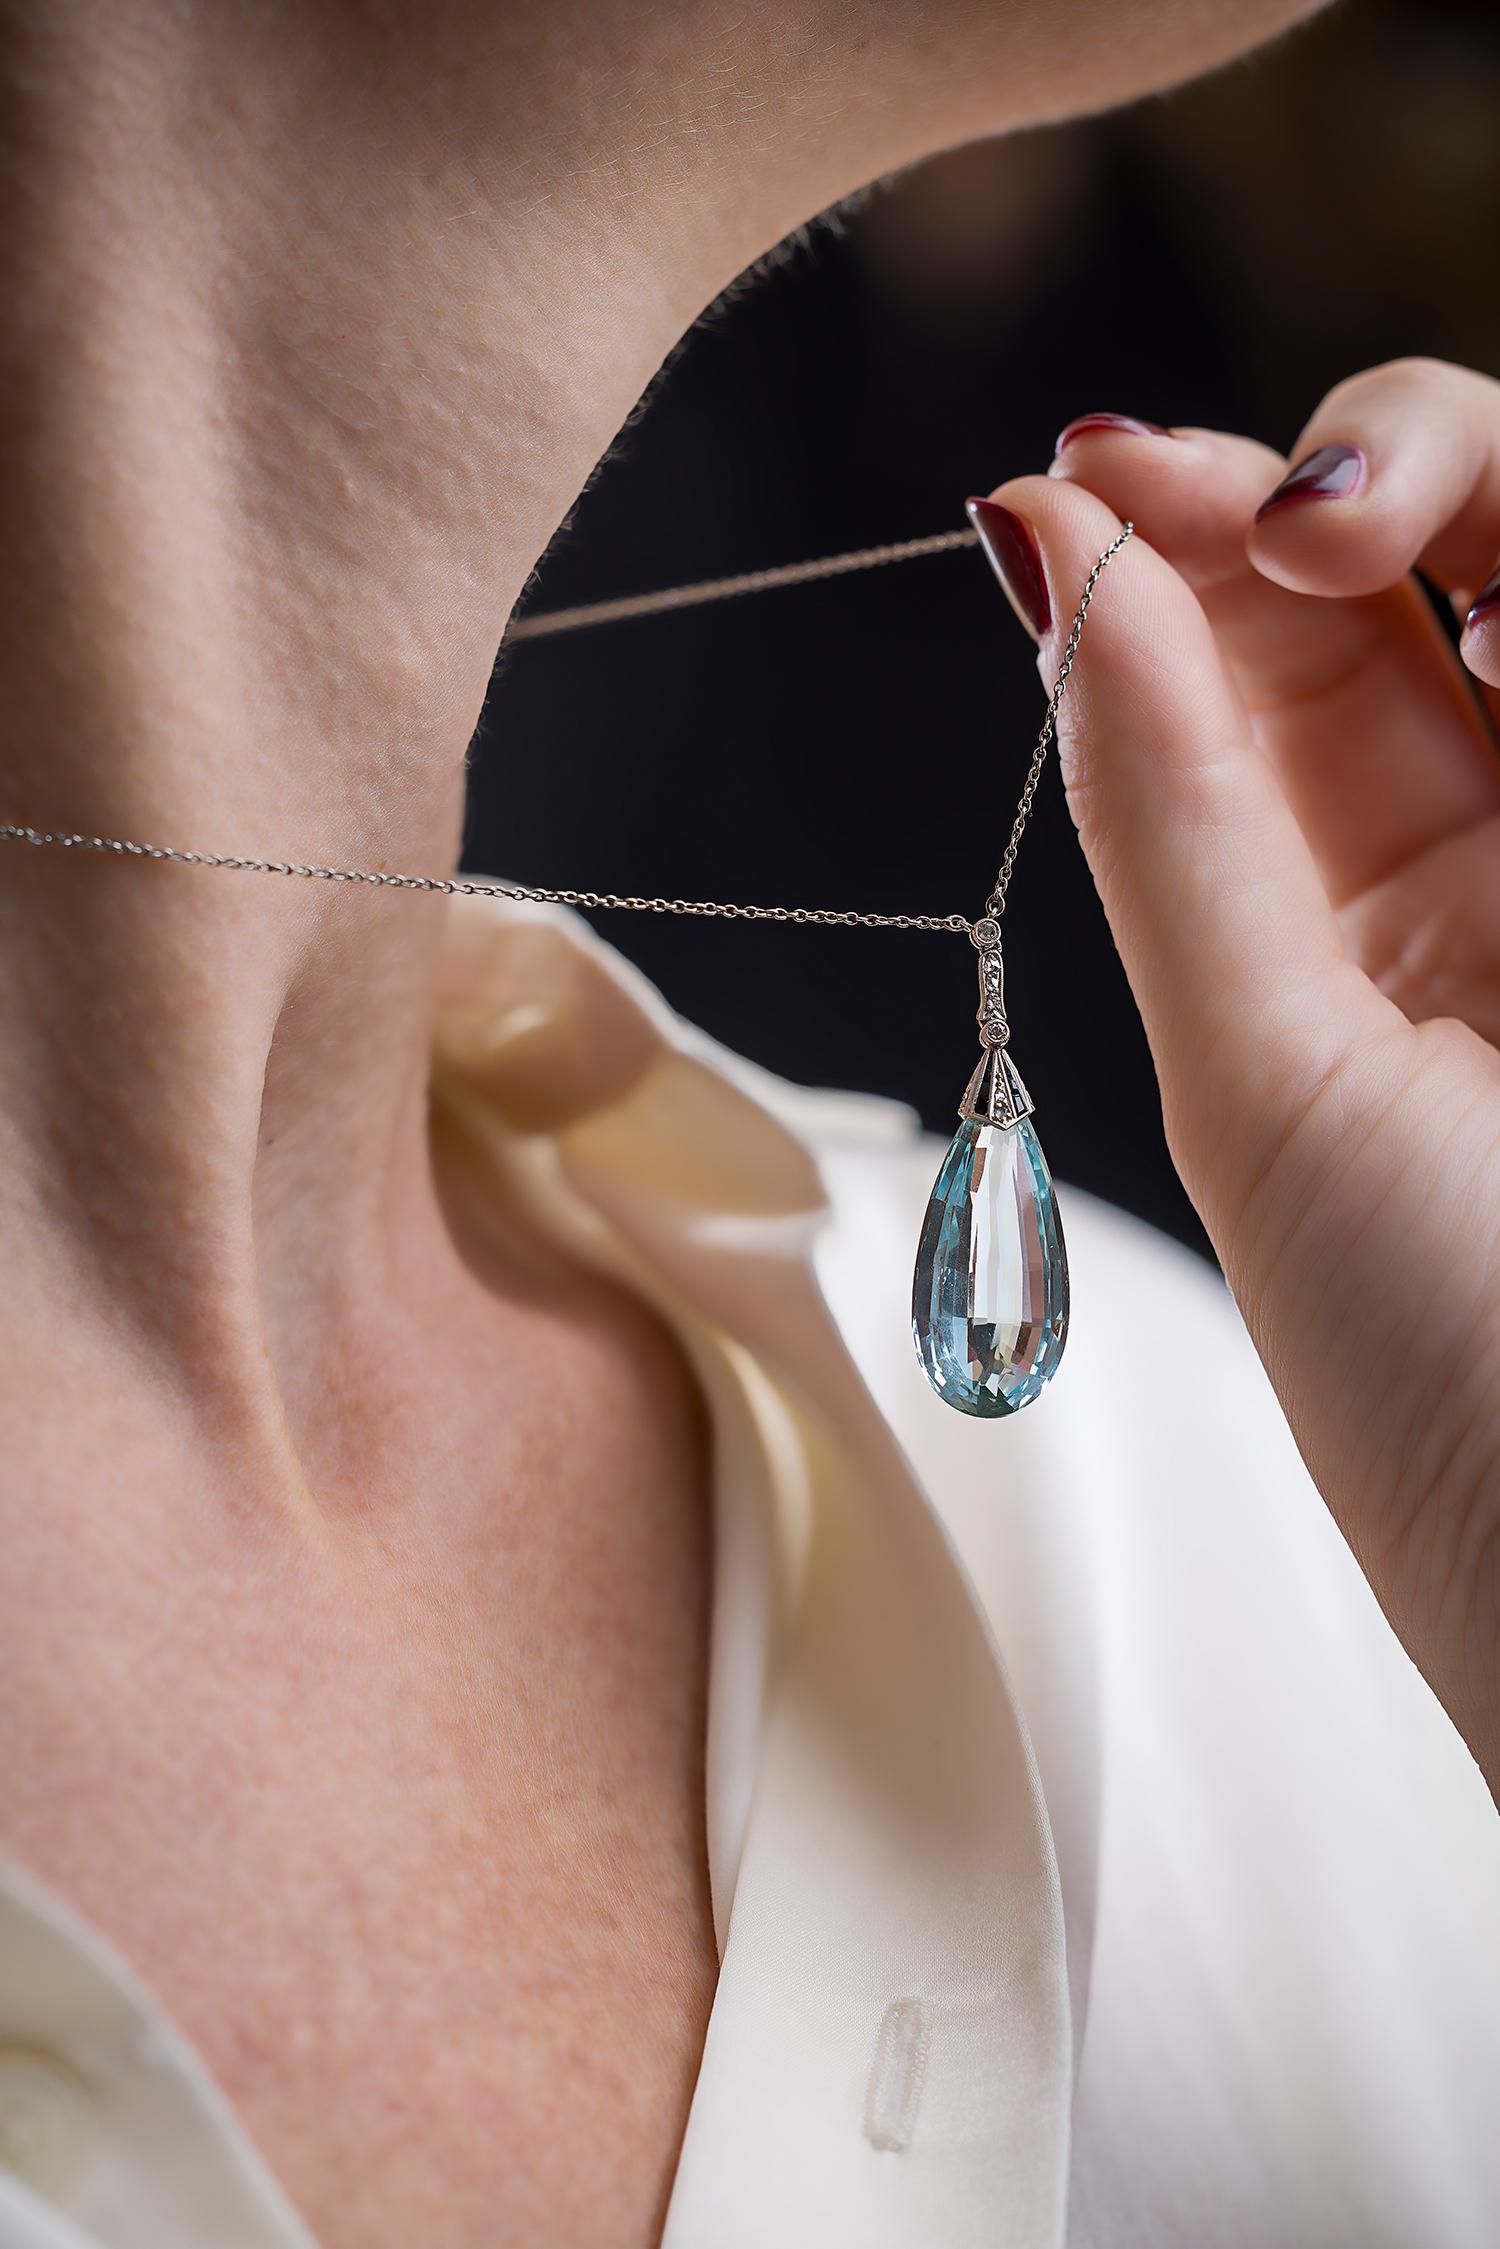 Immerse yourself in our drop of seawater.

Aquamarine & Diamond and onyx pendant.

Height of Aqua approx 2,5cm / 1 inch, 
13mm / 0.05 inch wide.
Total length of pendant 4 cm / 1,57 inch.

On a low carat gold chain approx 46 cm / 18,1 inch long.